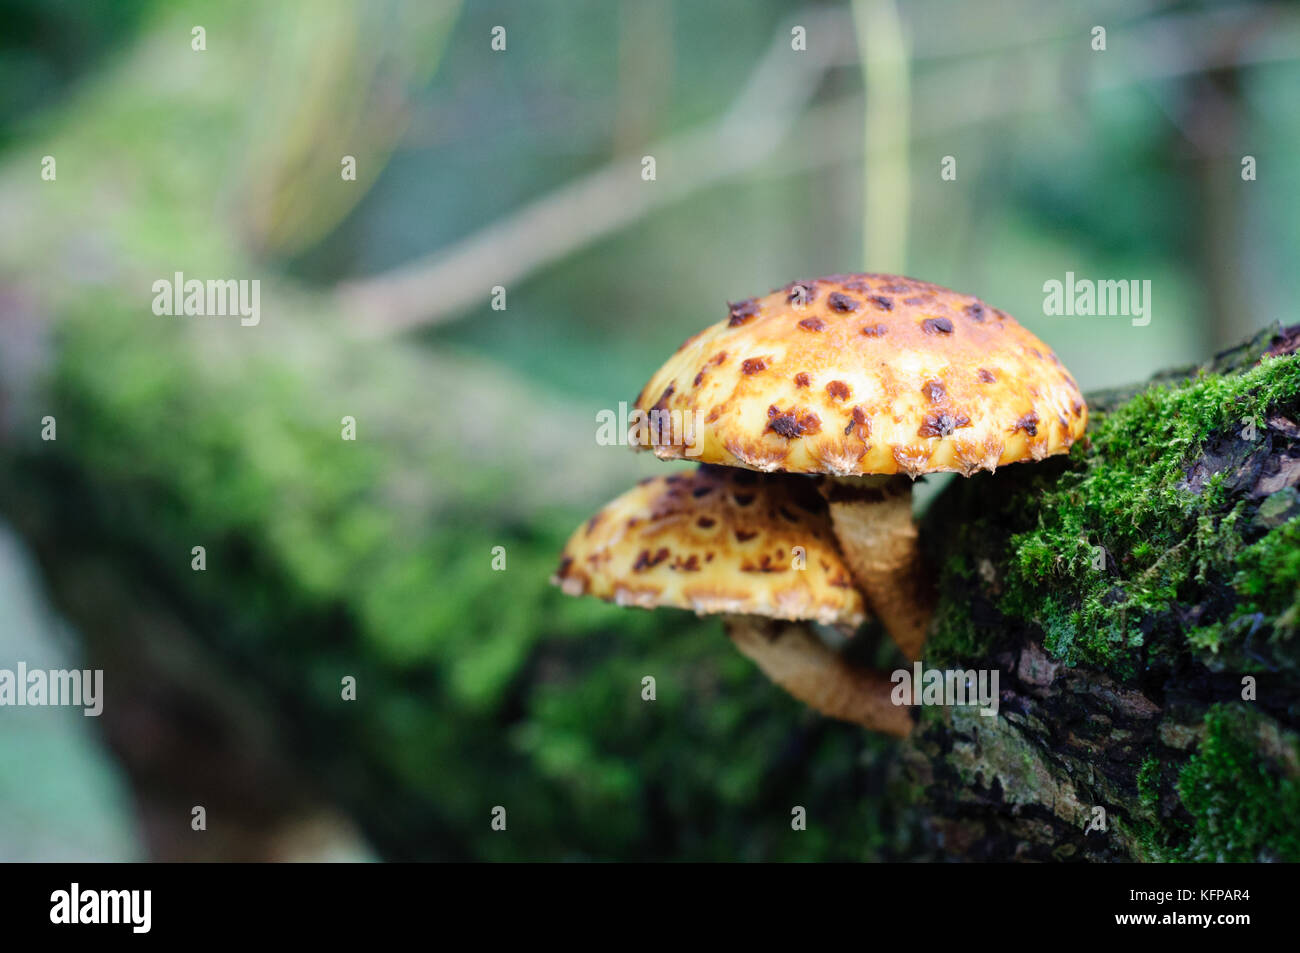 Yellow and brown spotted mushroom on a moss covered tree trunk Stock Photo